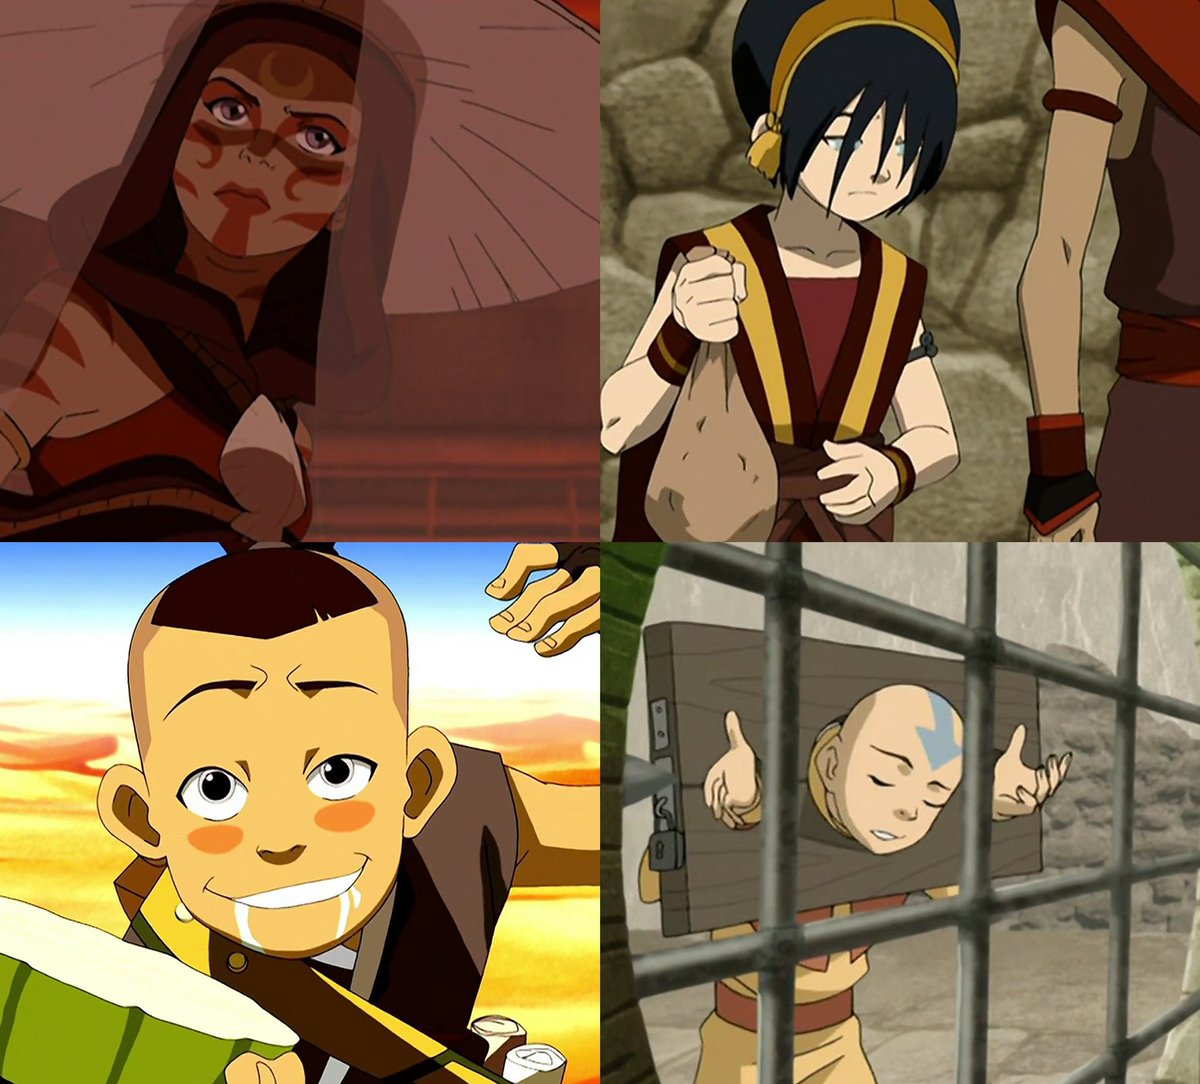 My favorite thing about ATLA is how the gaang be doing random side quests in the middle  of a century-old world war. Katara committing ecoterrorism , toph pulling insurance scams, Sokka getting high, Aang on death row in prison, just pure chaos 😭